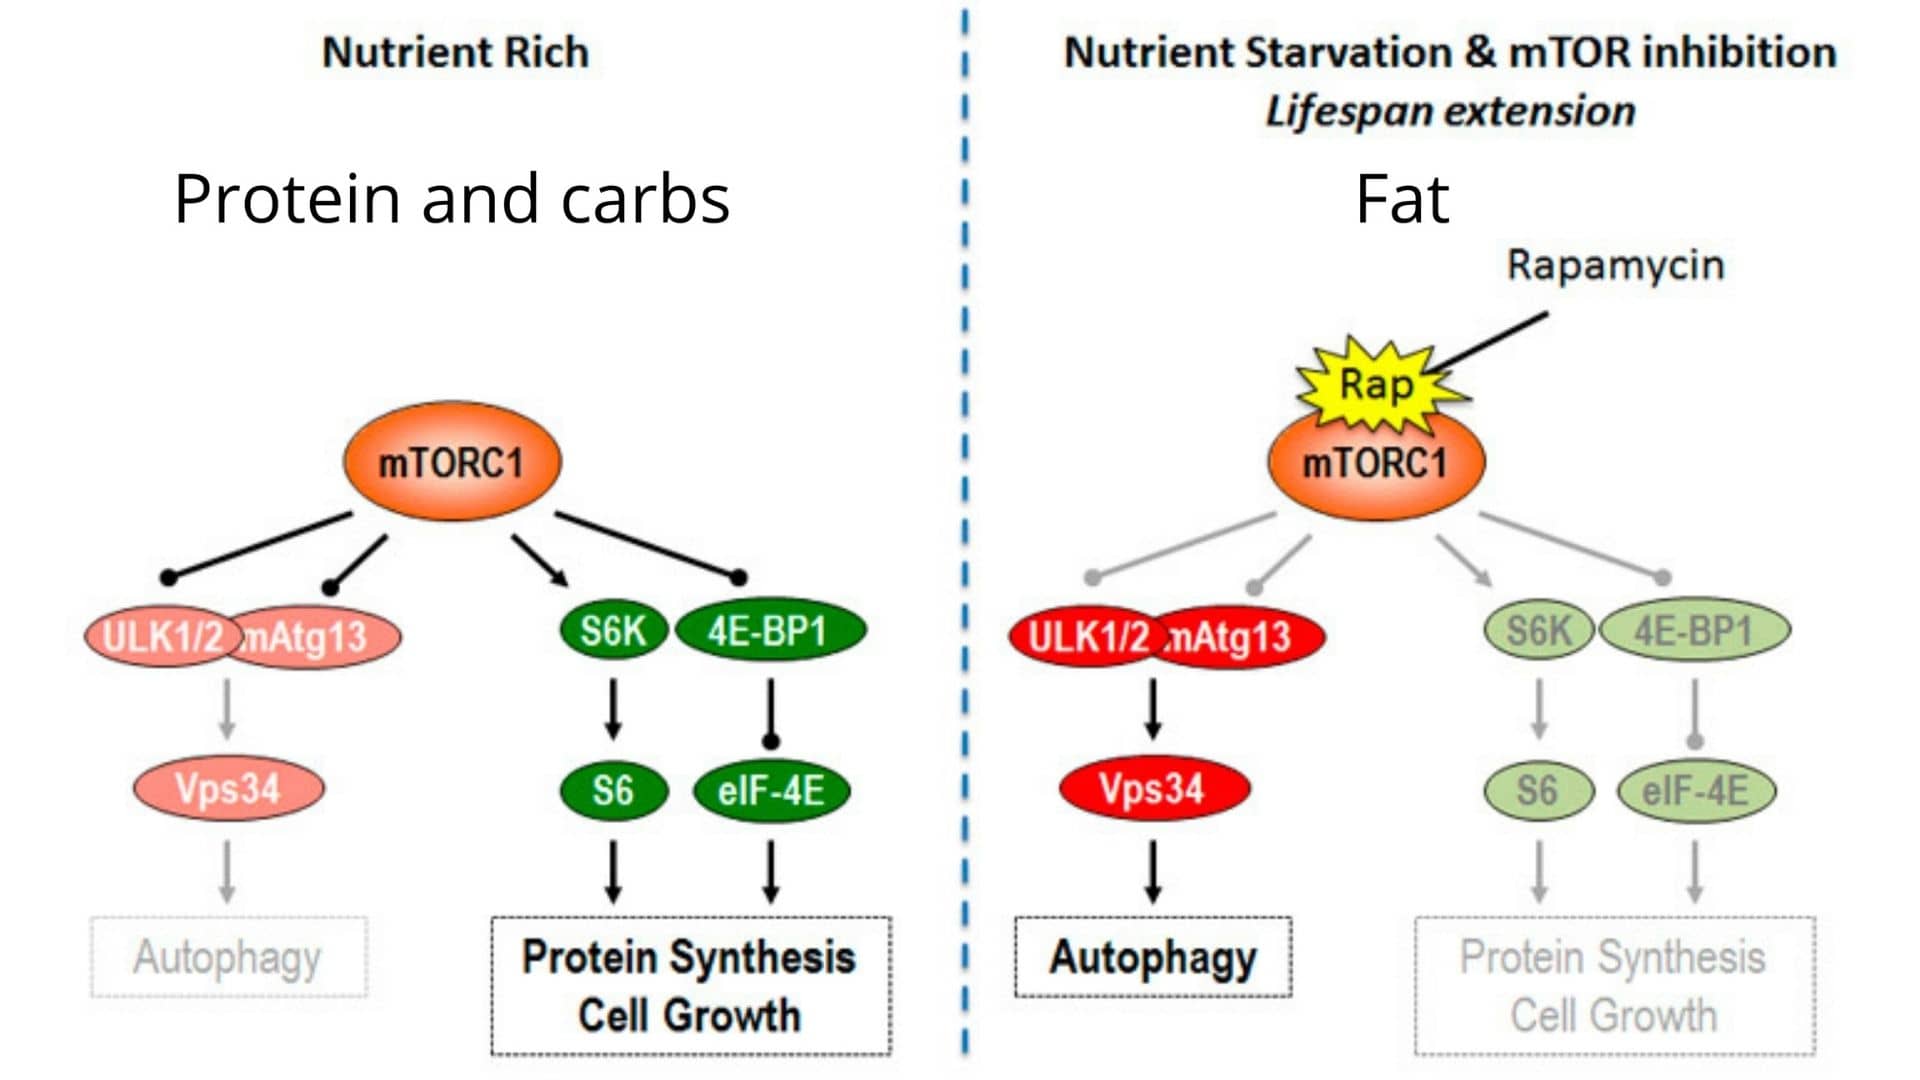 What activates the mTOR pathway? Proteins and Carbohydrates.